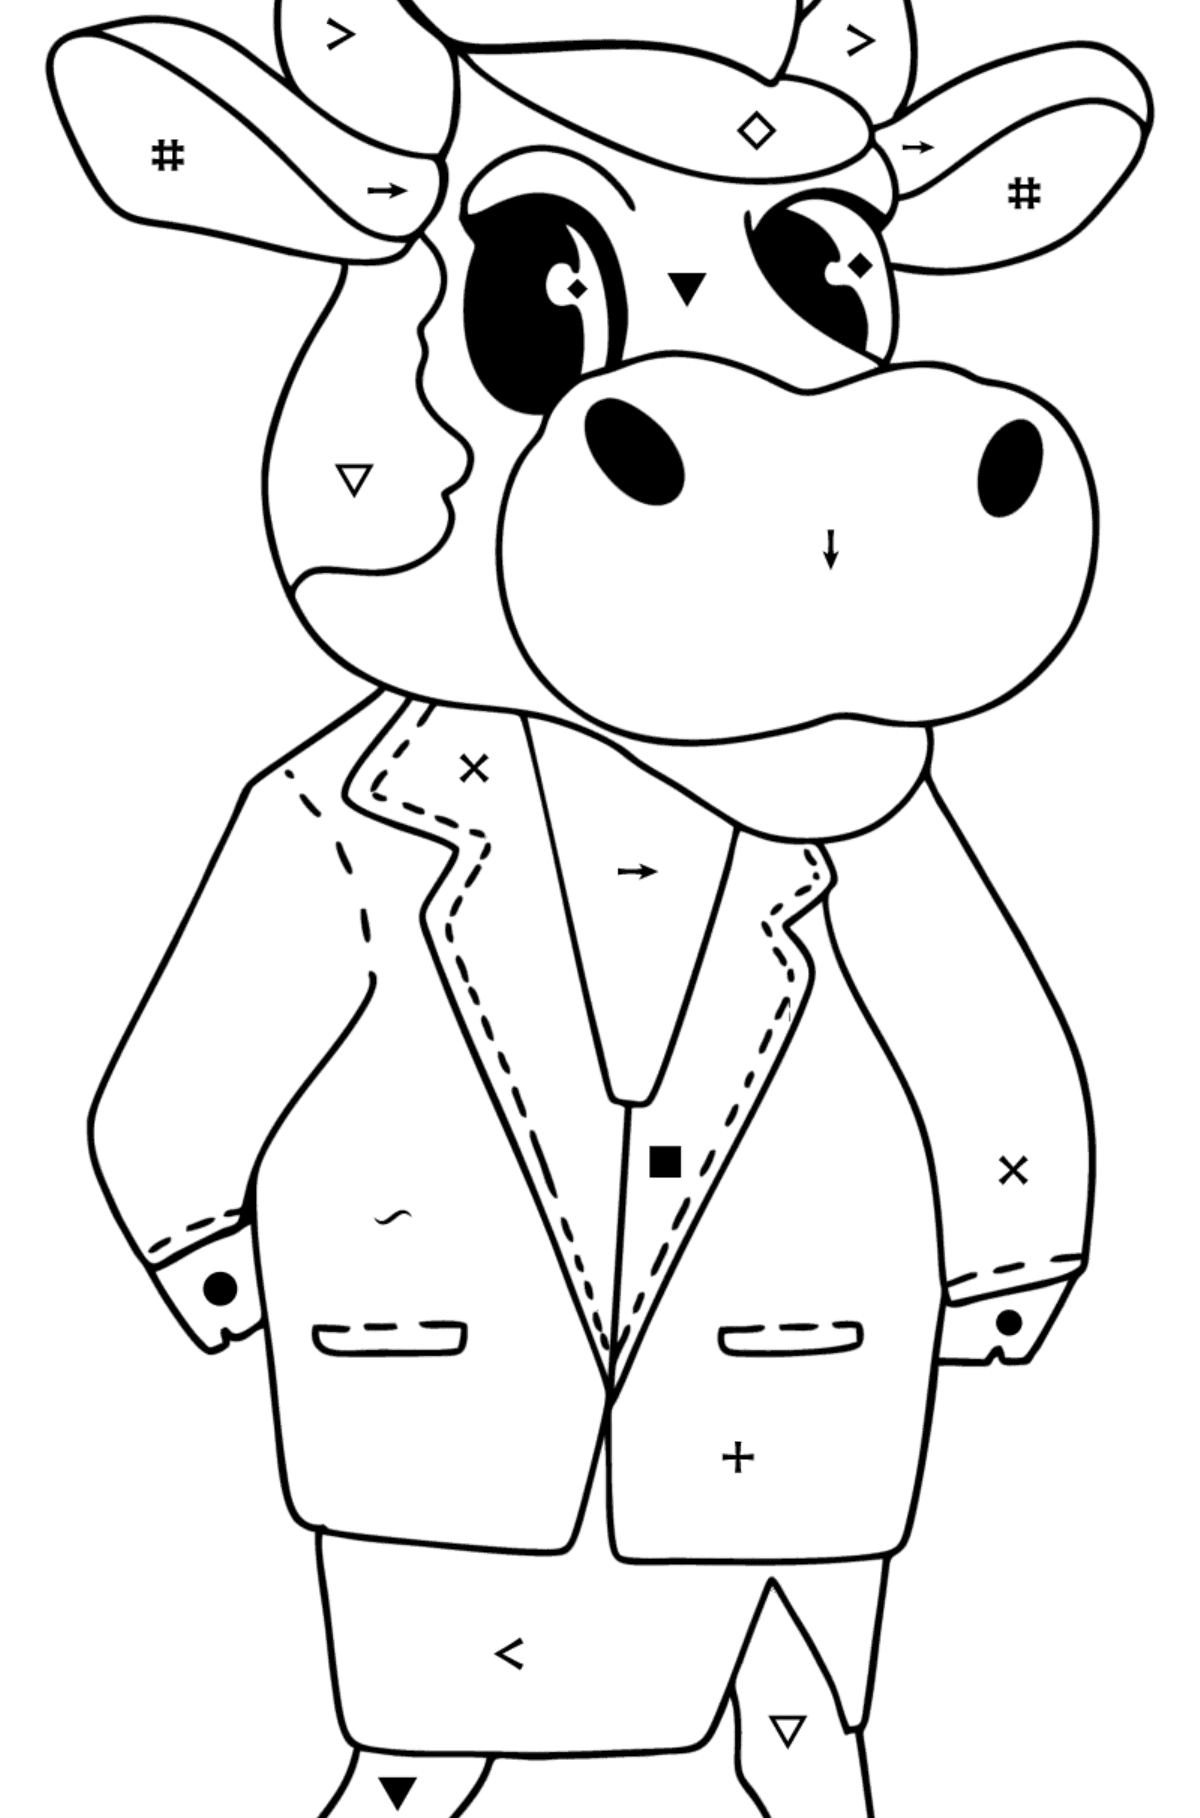 Cartoon cow coloring page - Coloring by Symbols for Kids